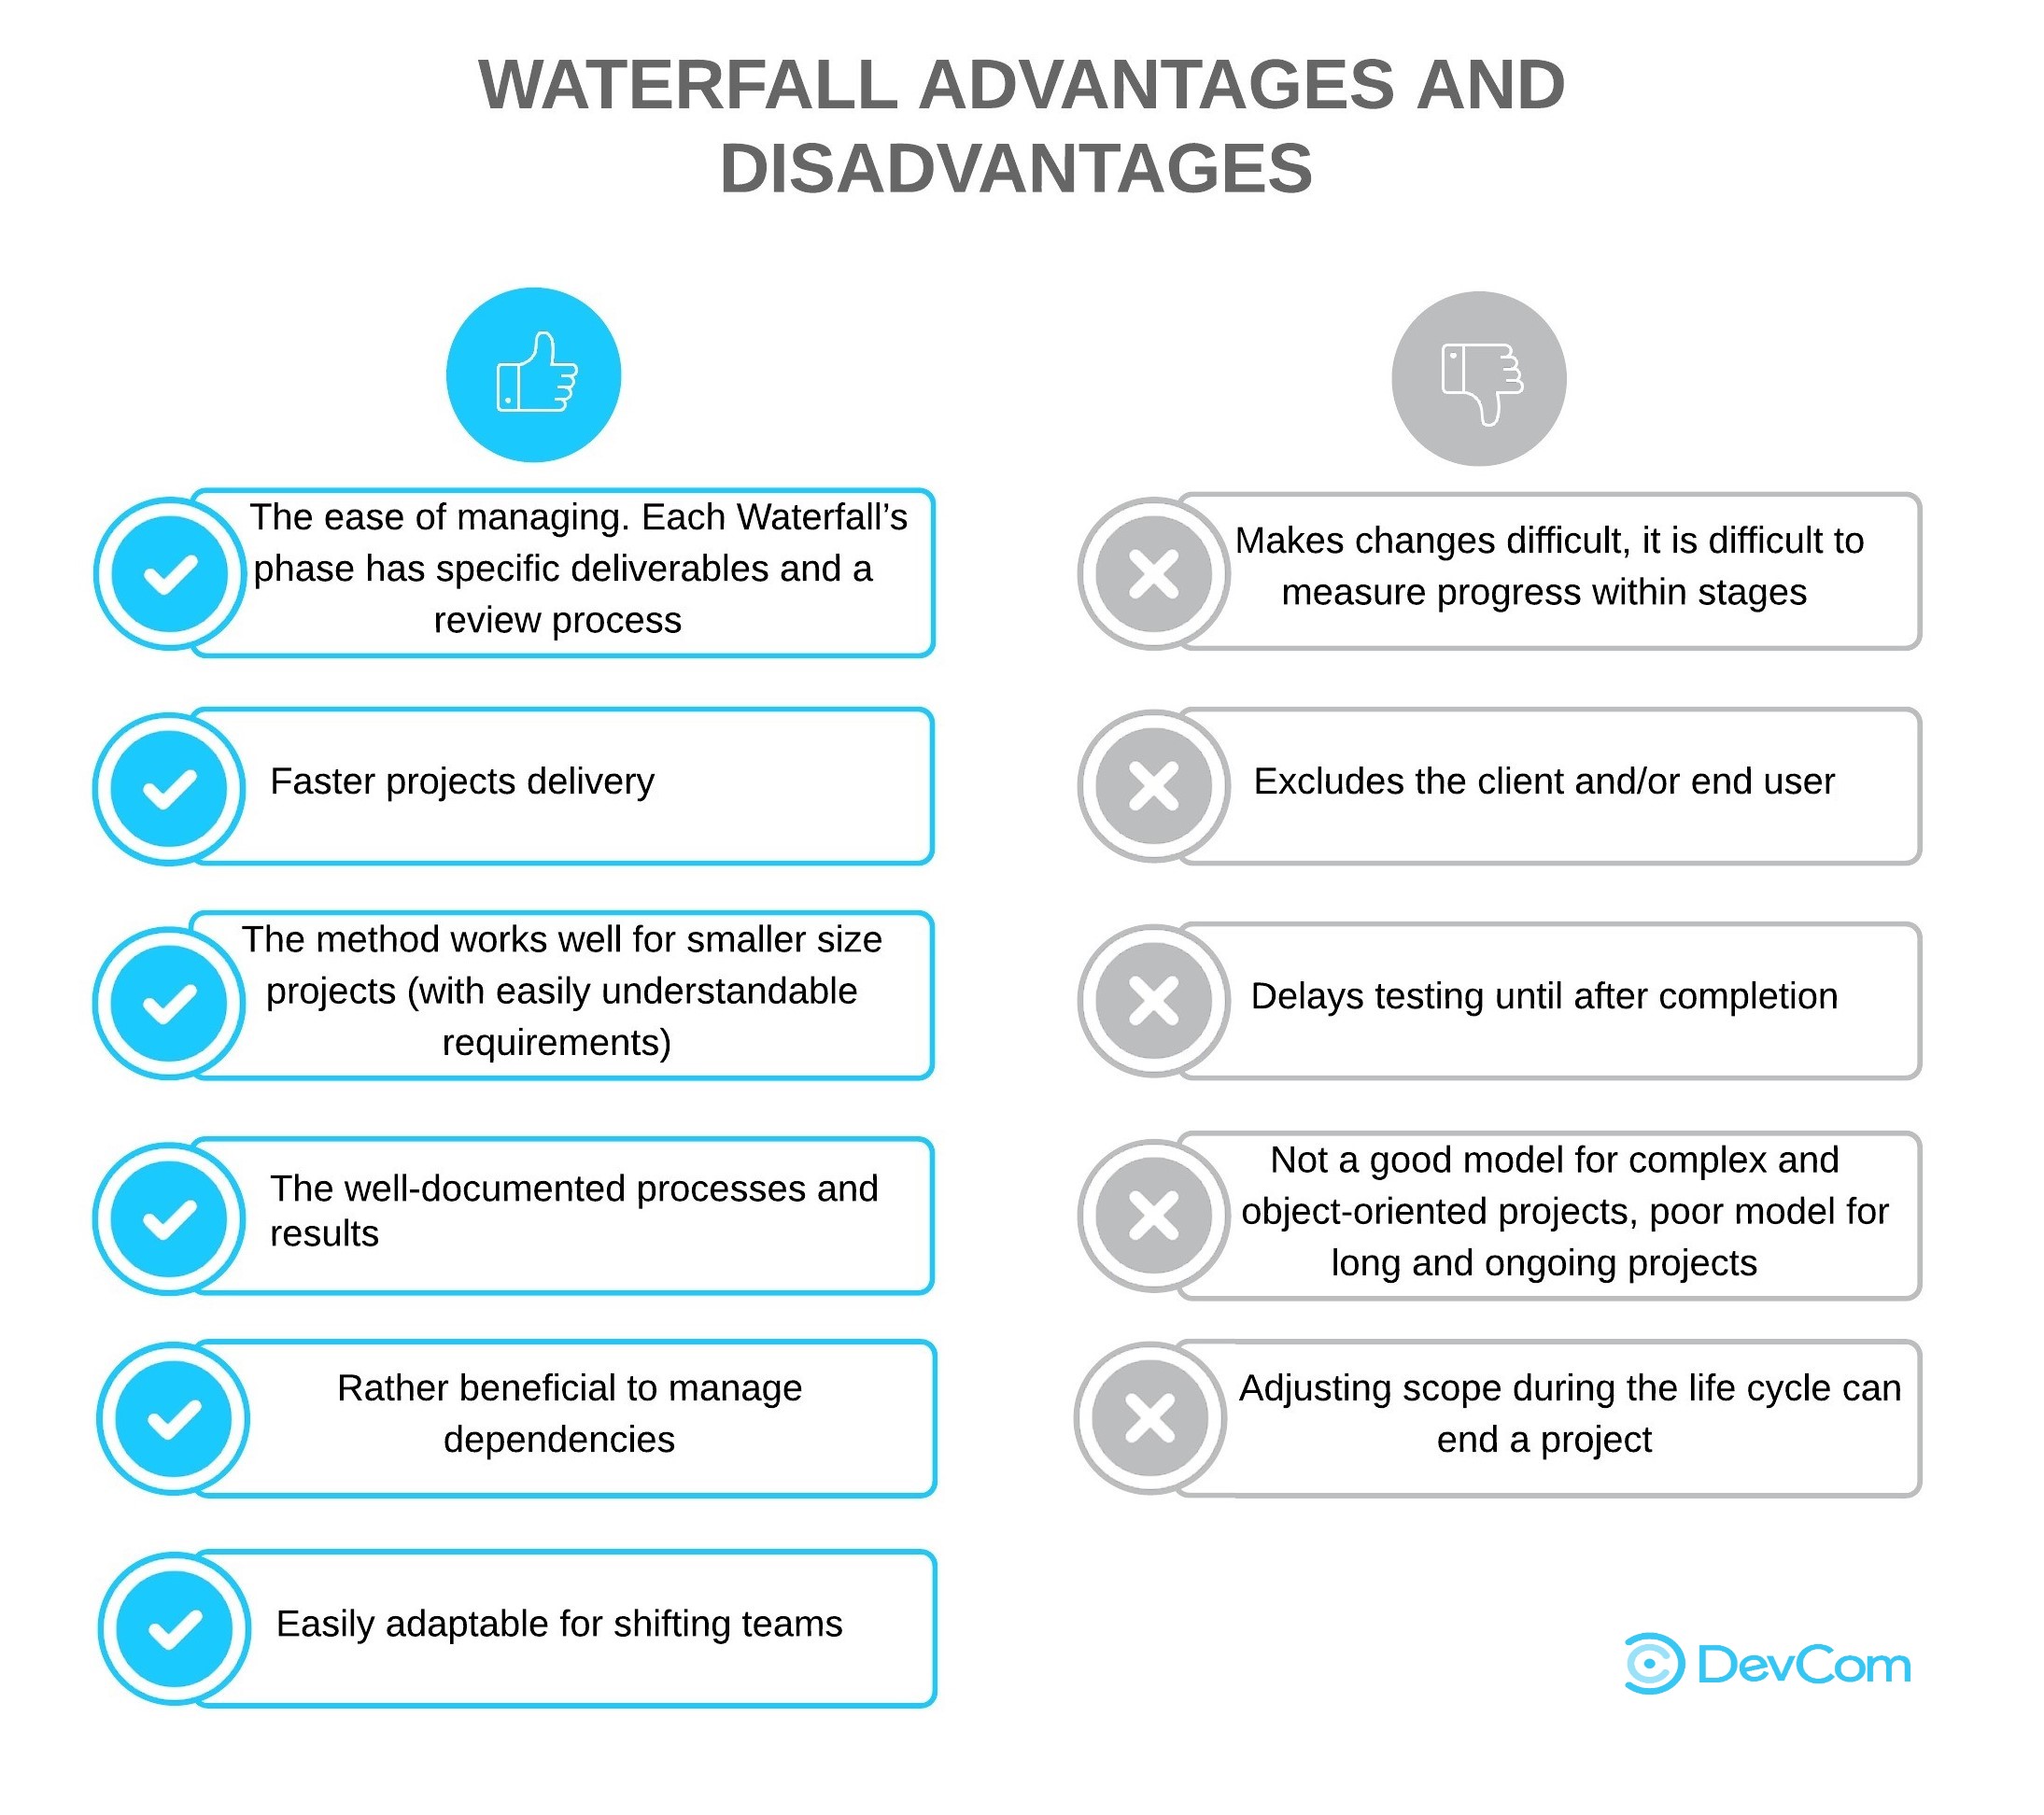 WATERFALL ADVANTAGES AND DISADVANTAGES